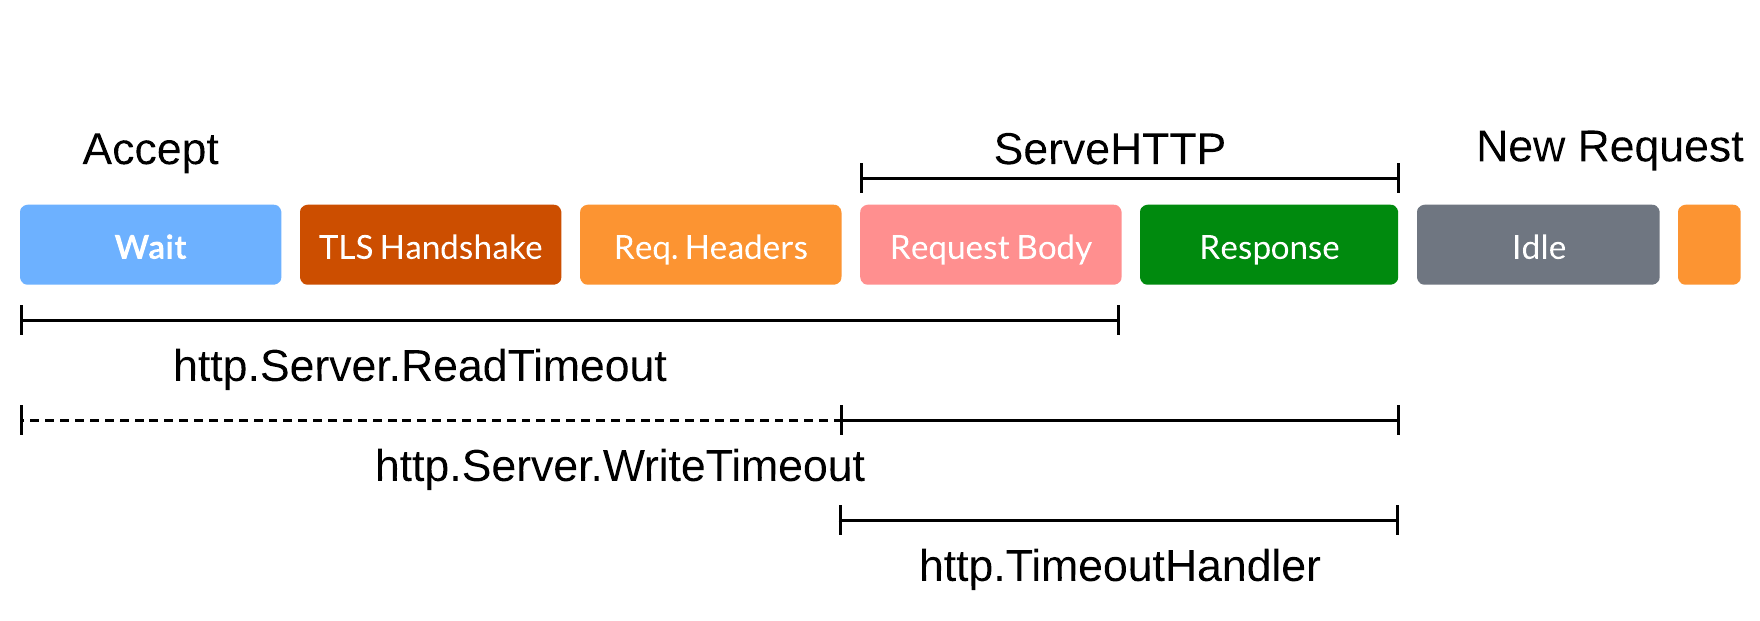 Example of HTTP request lifecycle and timeout settings